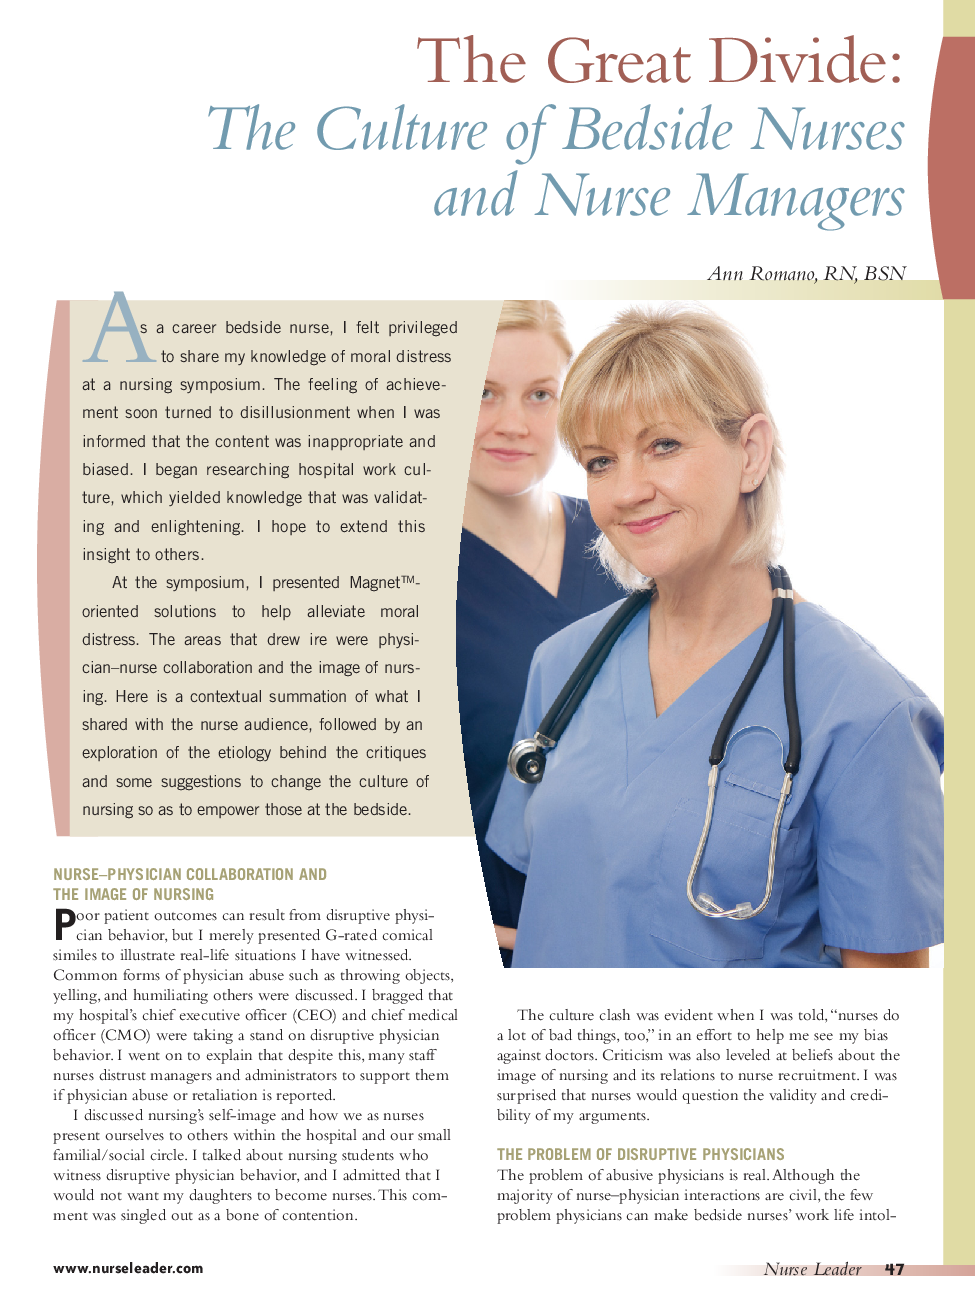 The Great Divide: The Culture of Bedside Nurses and Nurse Managers